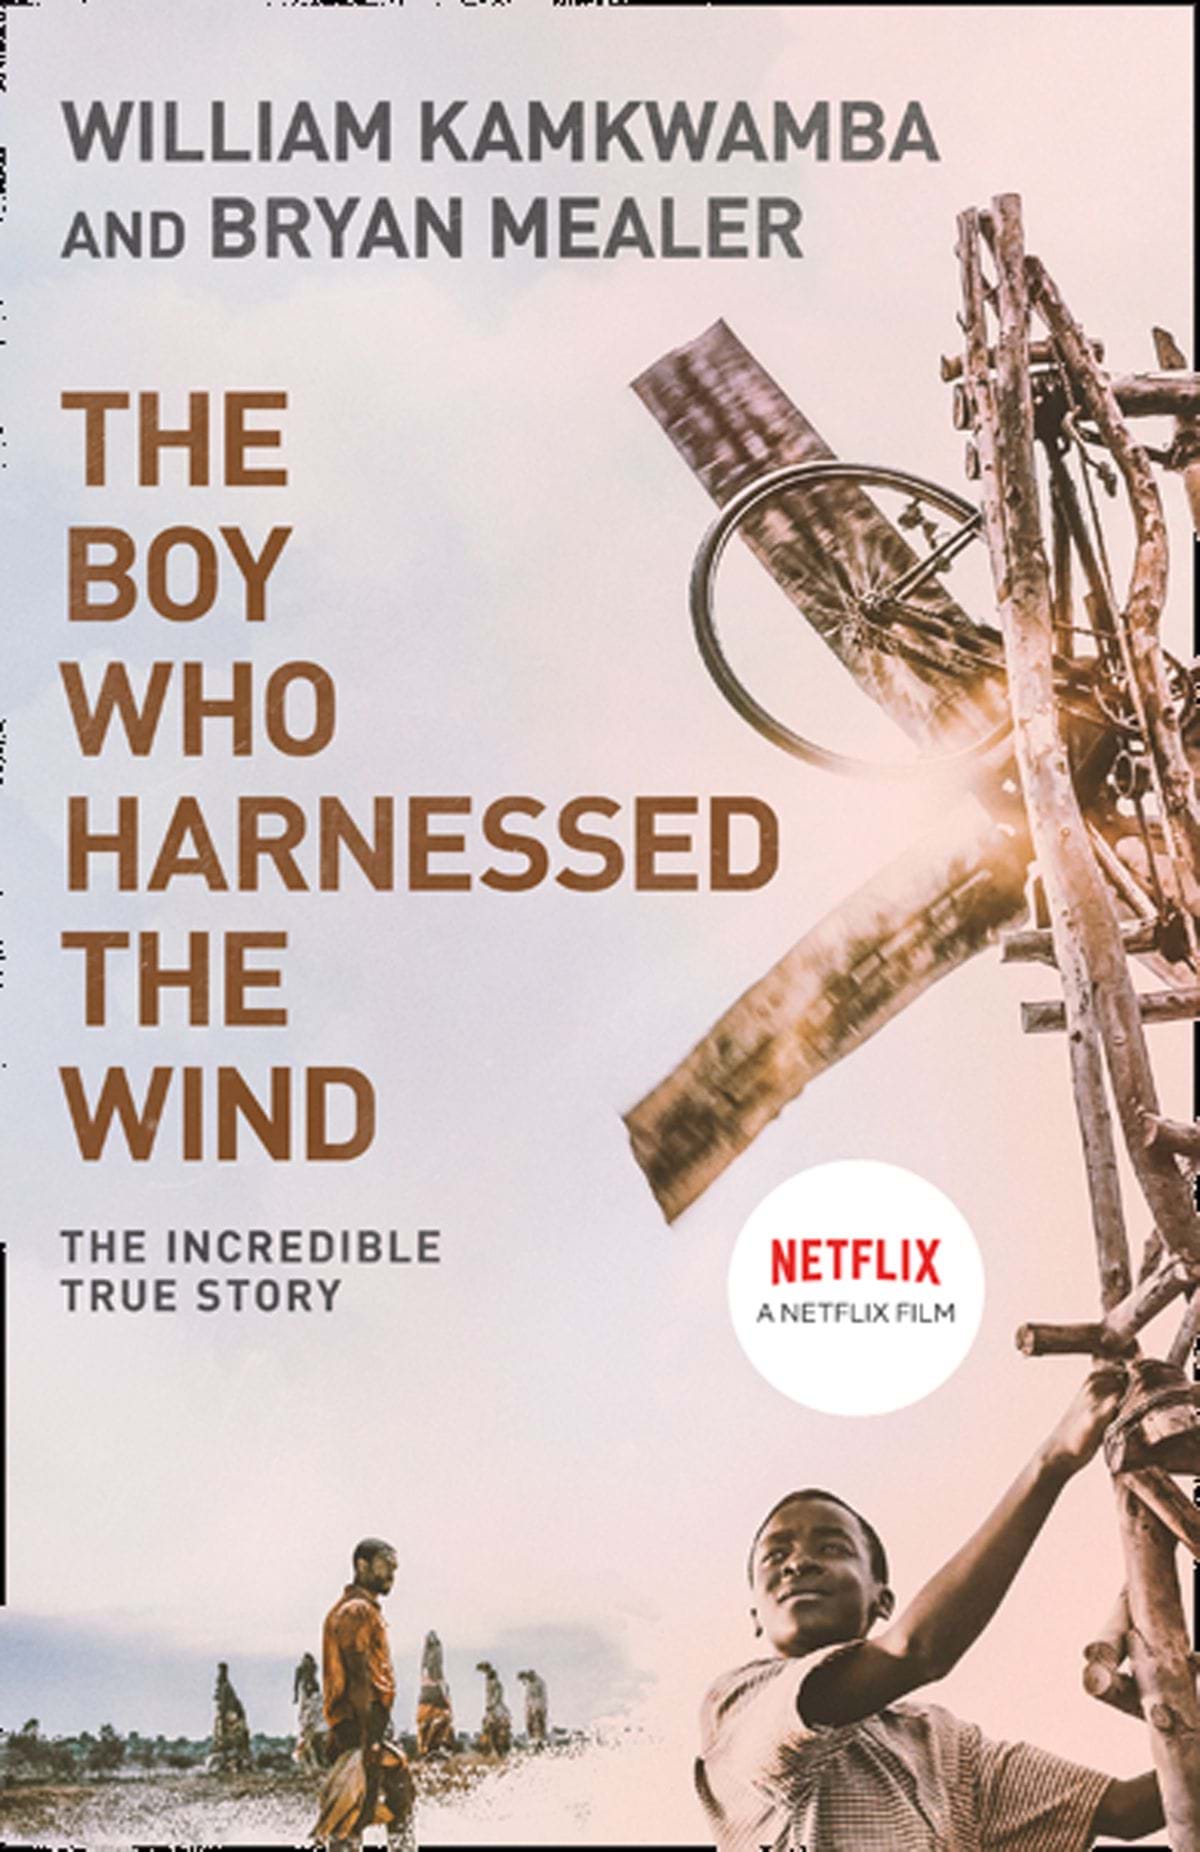 the-boy-who-harnessed-the-wind by darshali soni.jpg